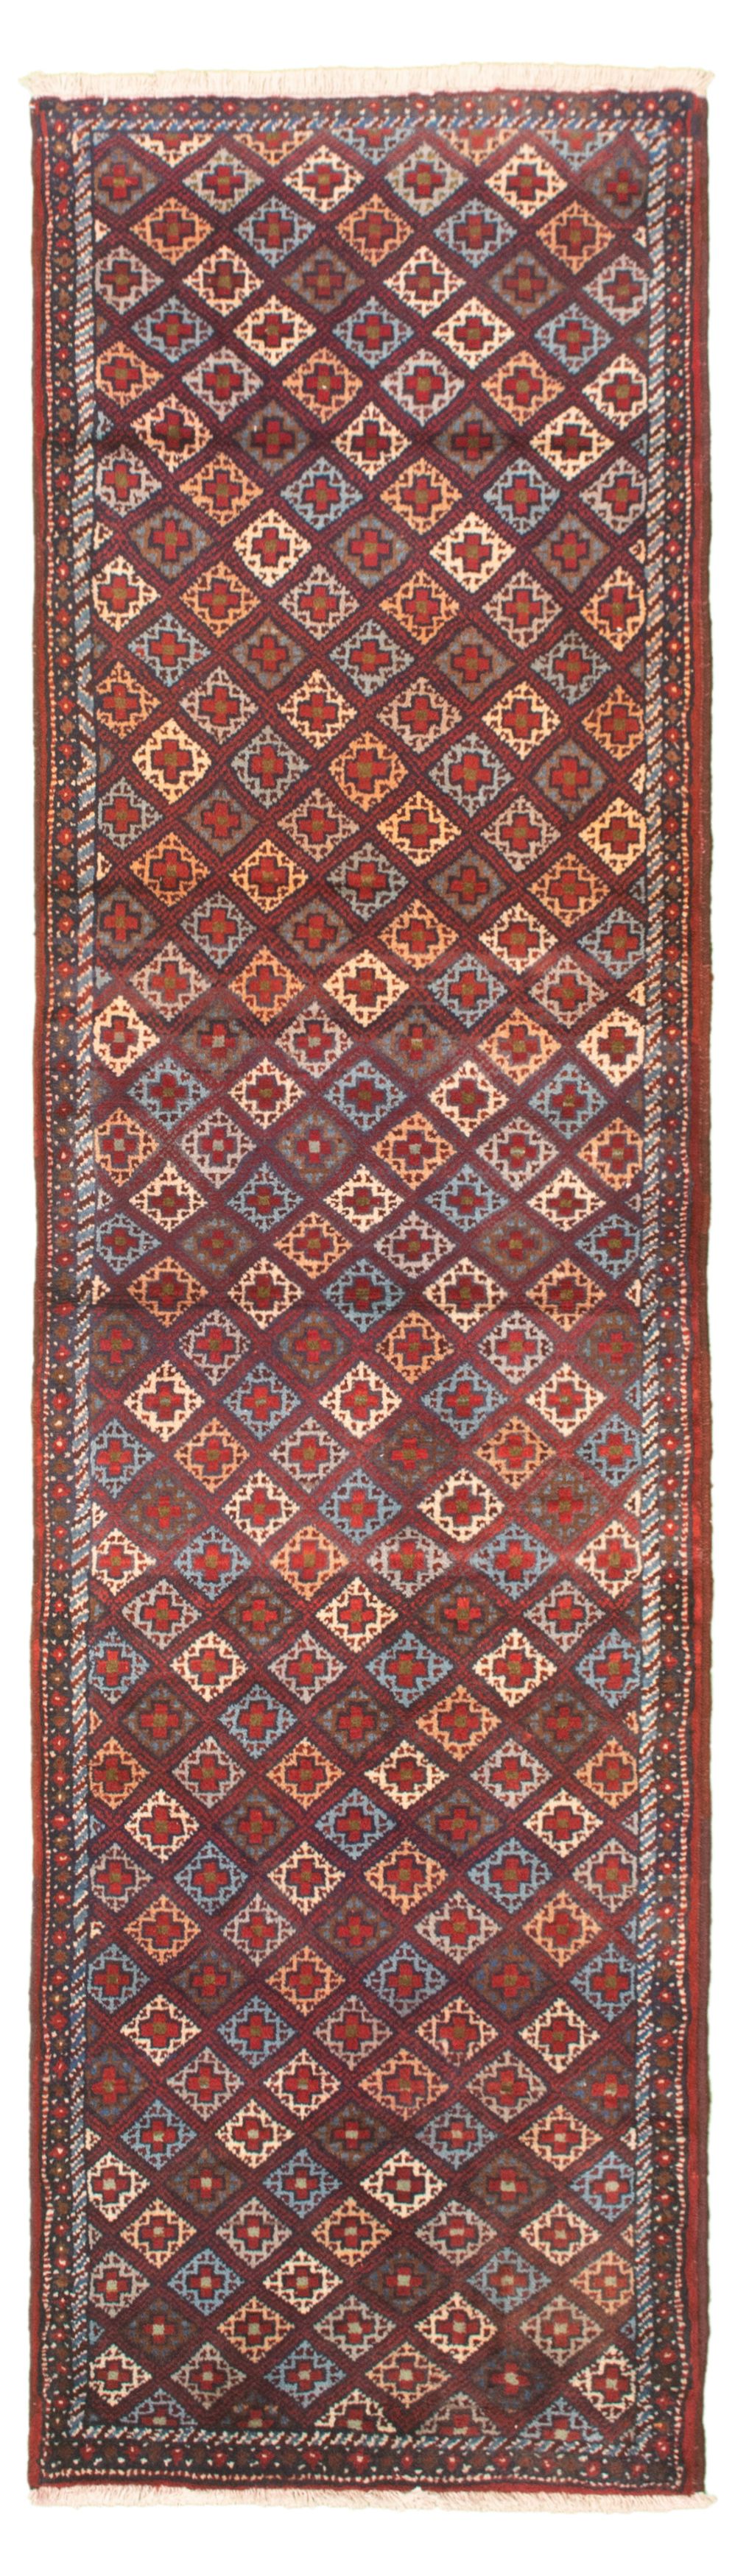 Hand-knotted Authentic Turkish Burgundy Wool Rug 2'8" x 9'5" Size: 2'7" x 9'5"  